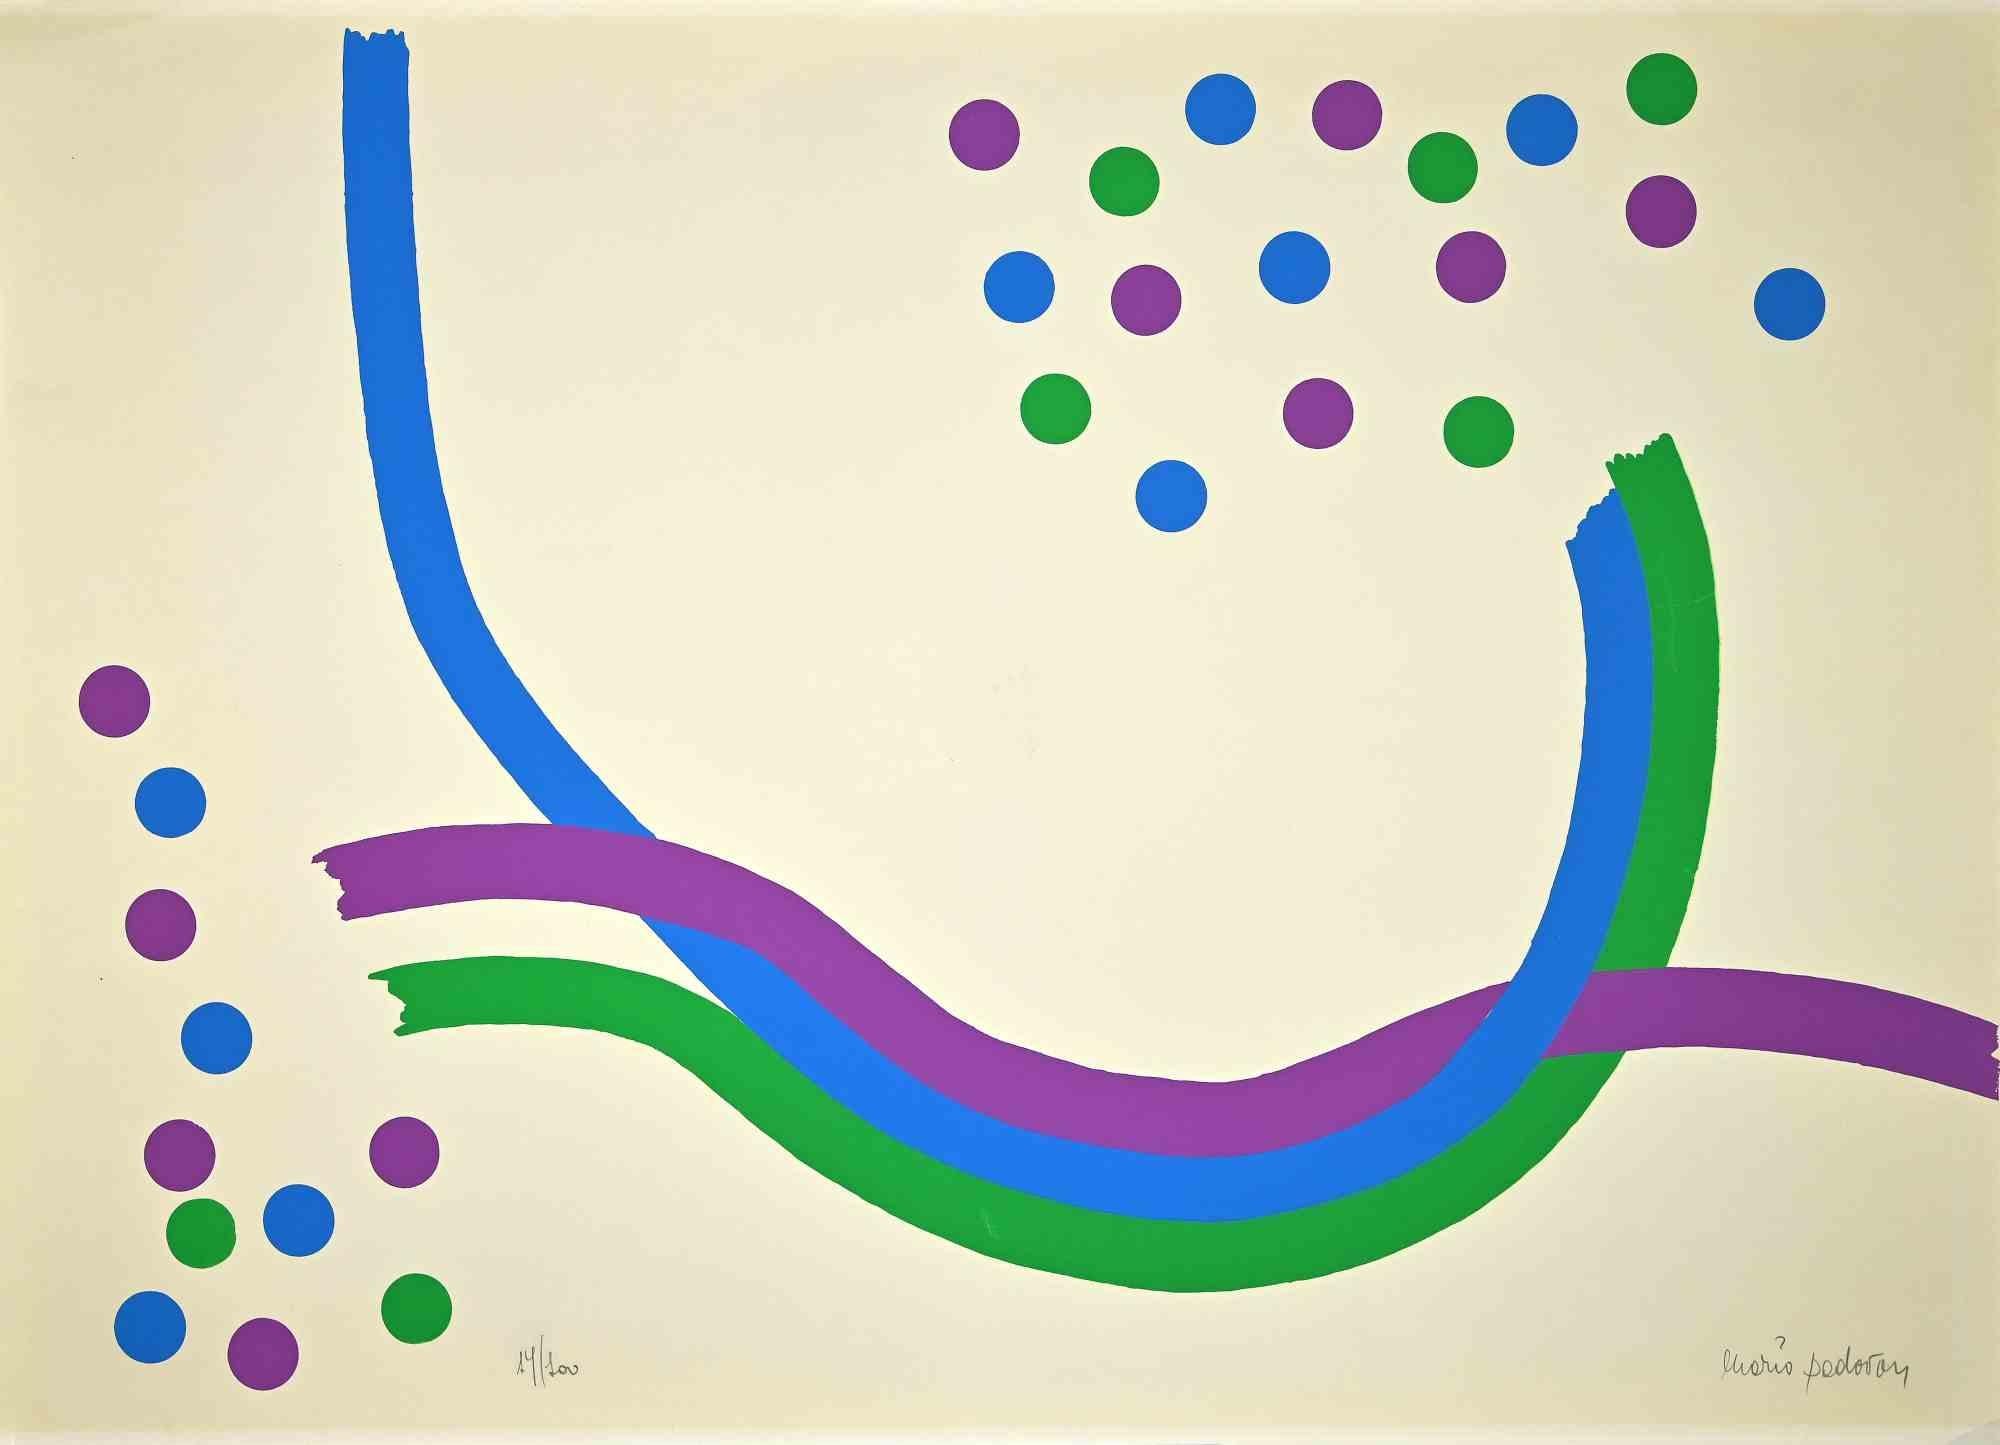 Abstract Composition is a beautiful colored screen print realized by Mario Padovan.

Hand-signed in pencil on the lower right. Numbered on the lower left, the edition of 14/100. With the label of "La nuova fglio- Pollenza- XVI- Festival dei due